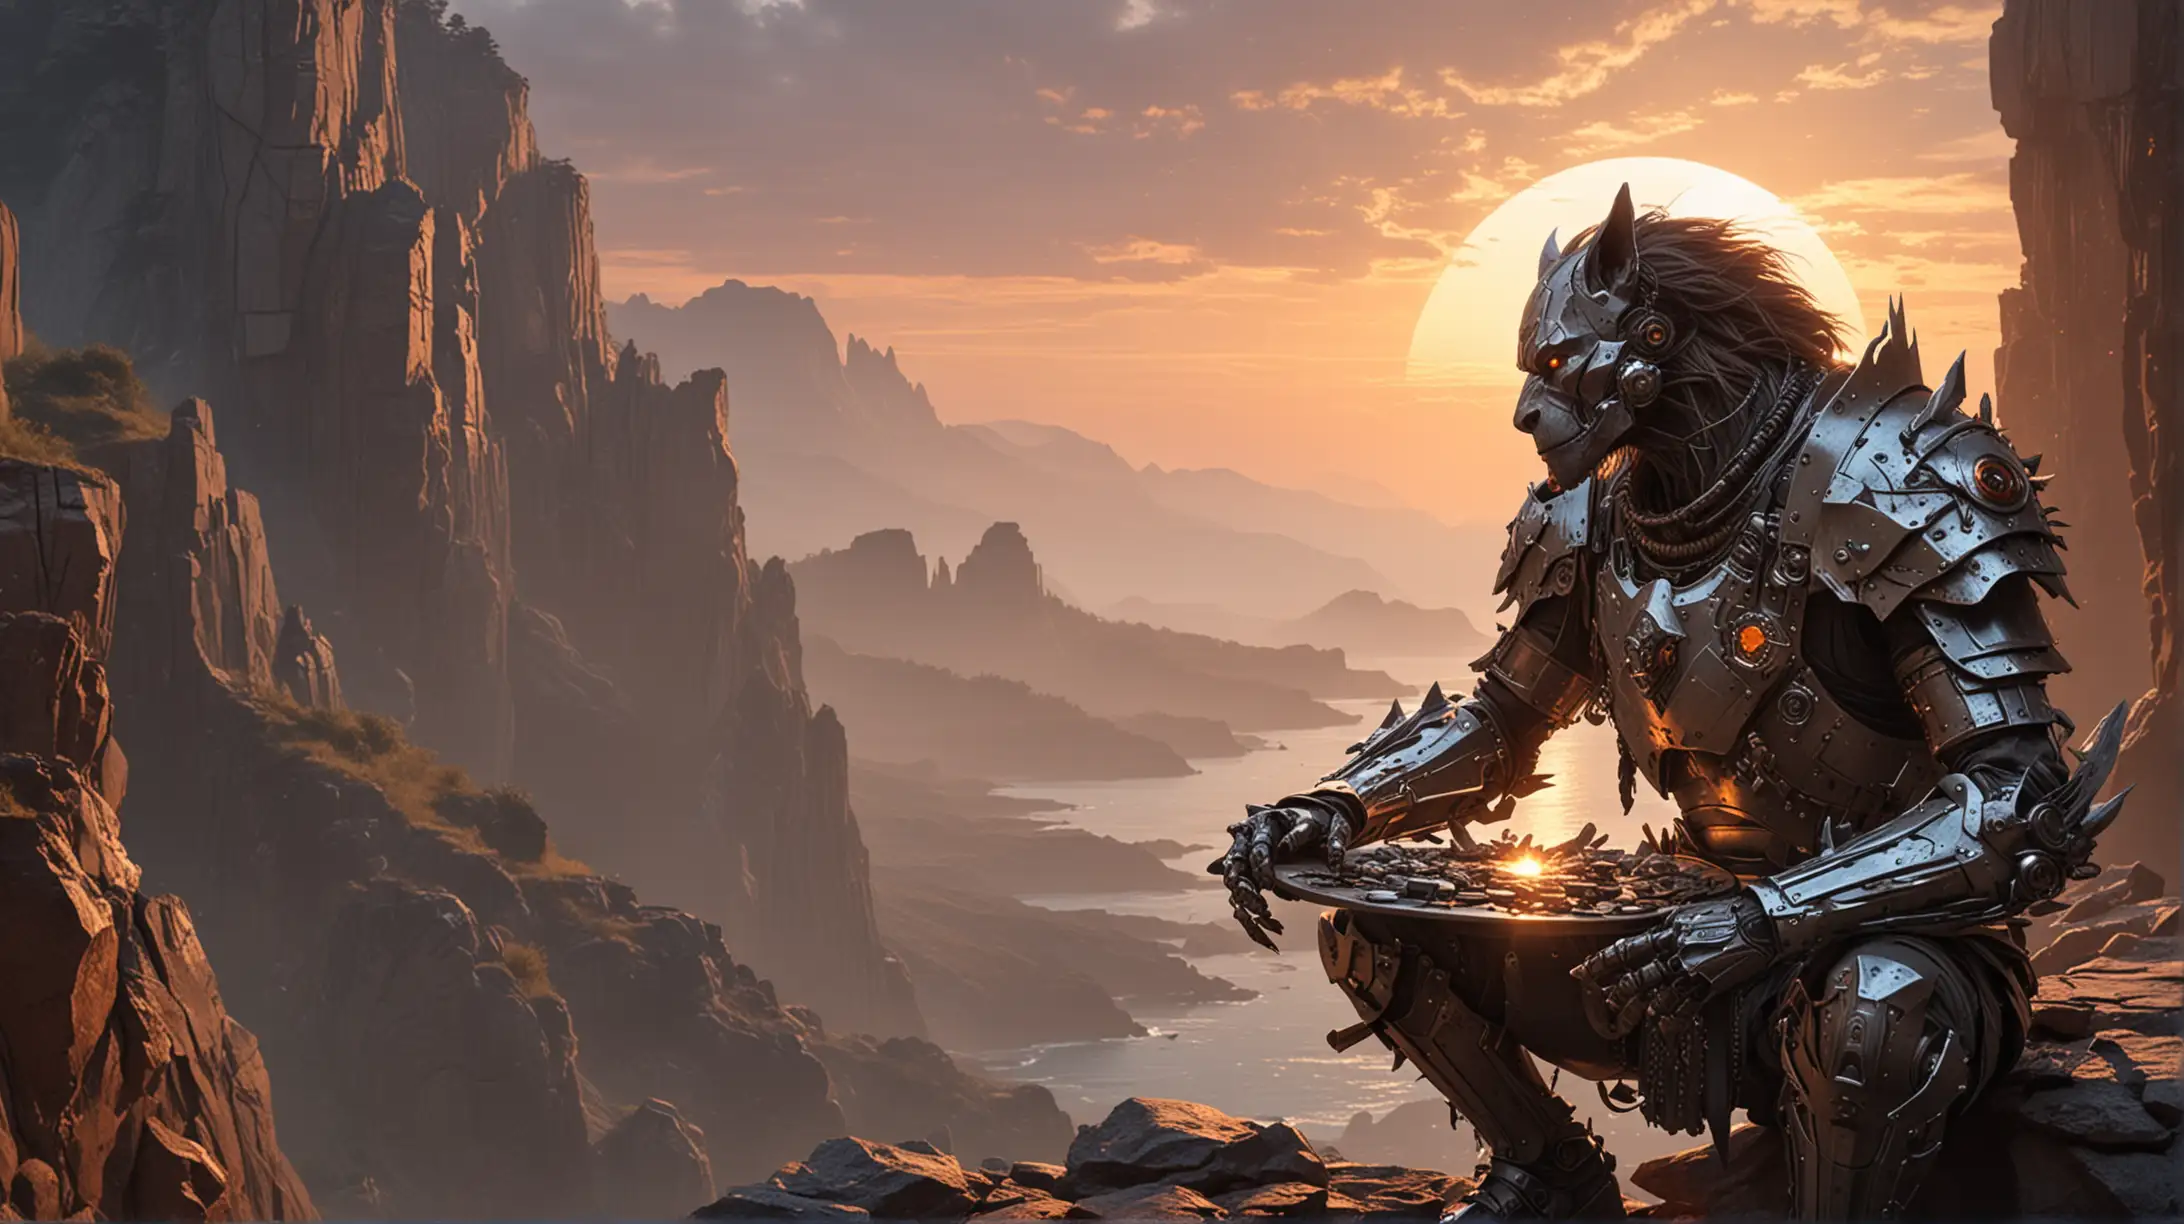 Cyborg Werewolf in Ancient Plate Armor Observing Sunrise on Cliff Edge